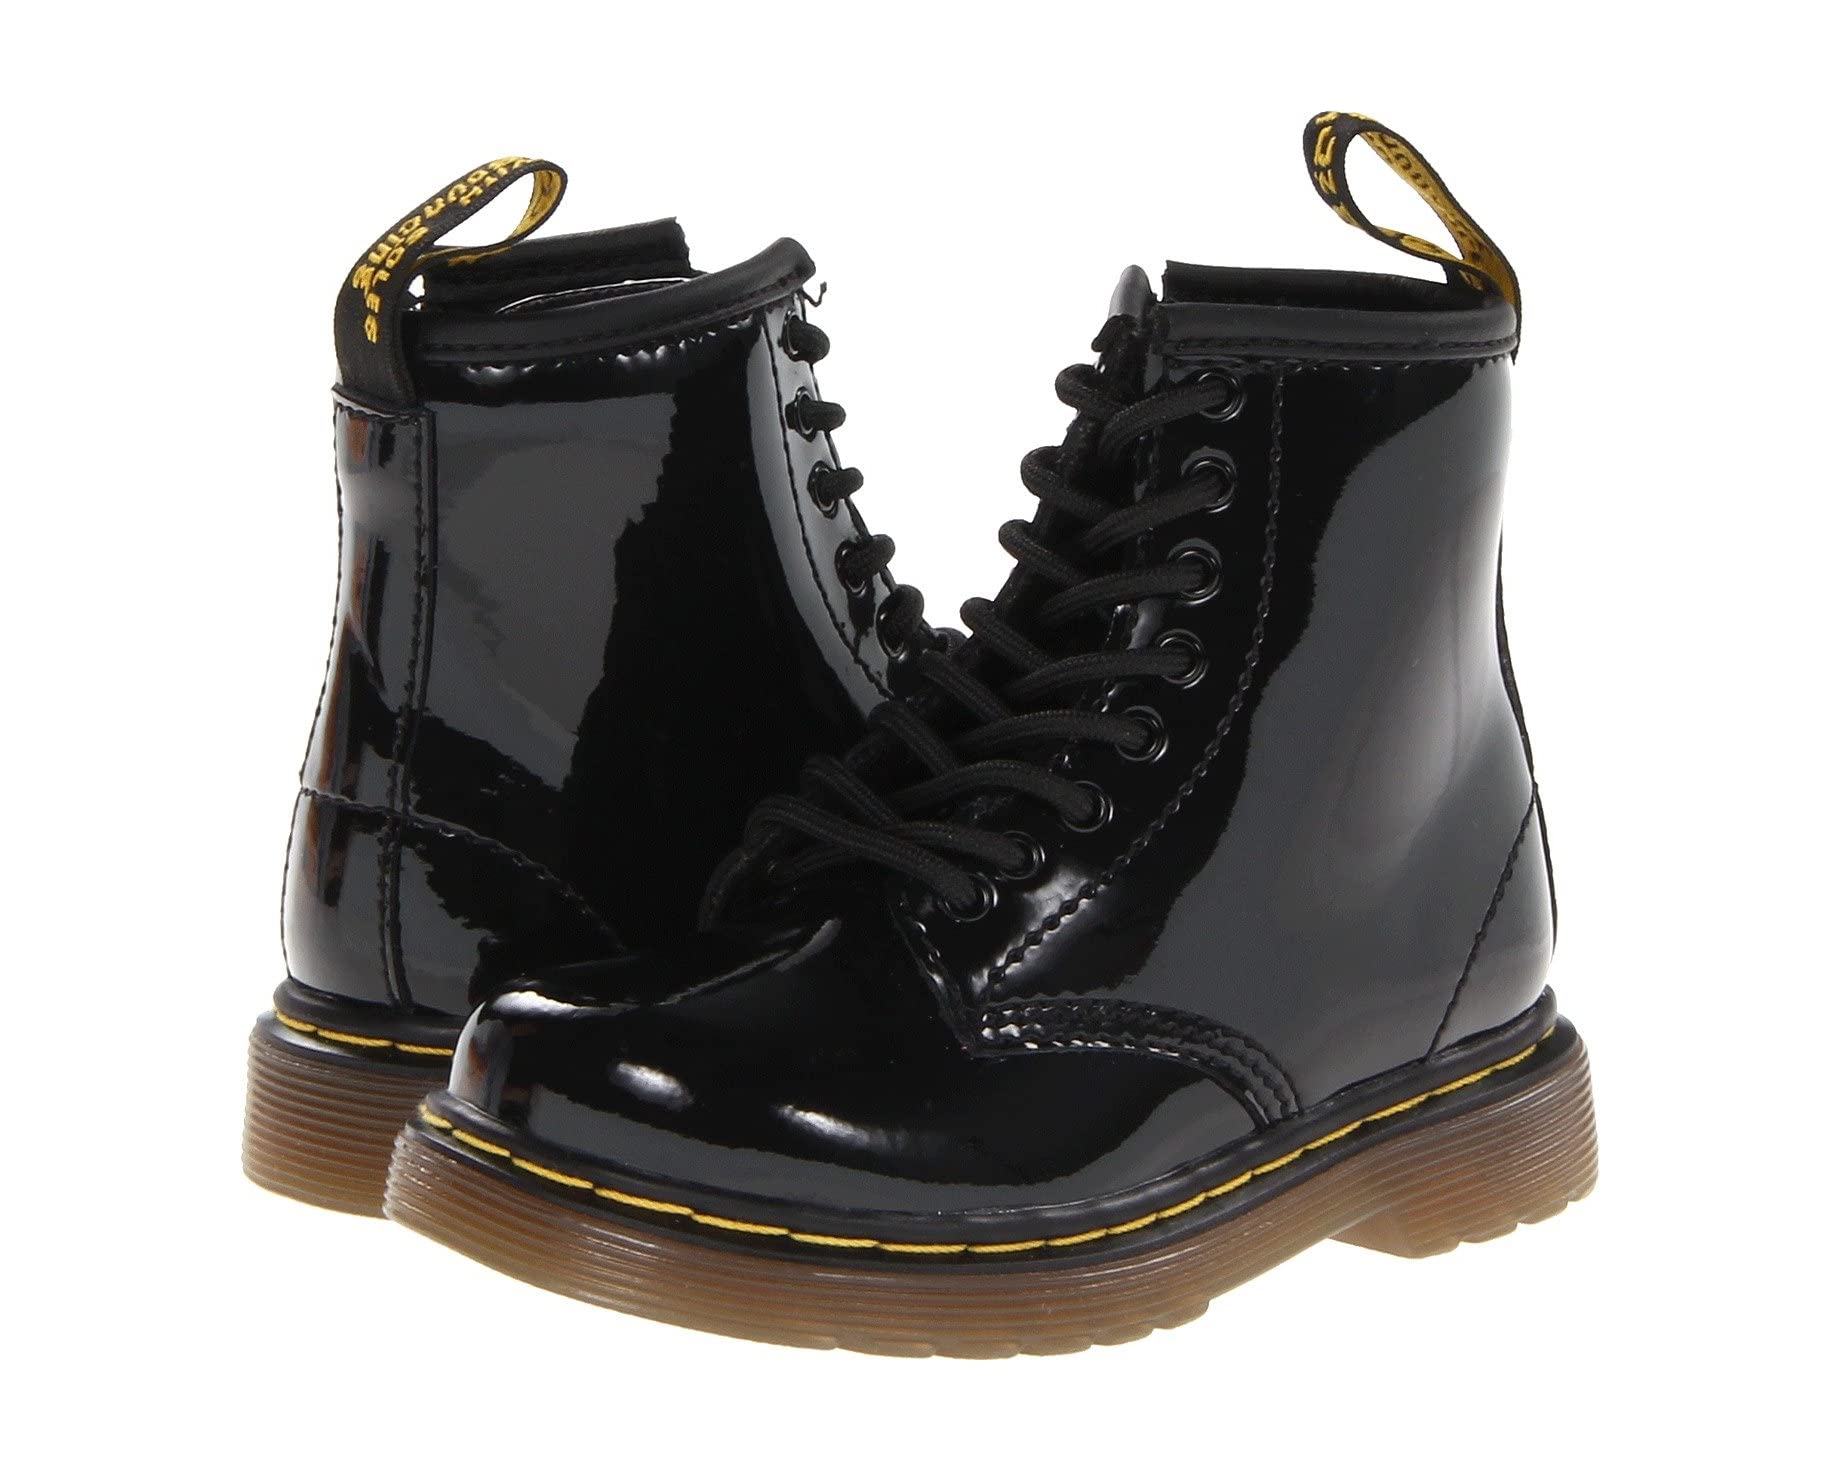 Dr. Martens Toddlers' 1460 Brooklee Boots (Black Patent Lamper, Sizes 7-10) $25 + Free Shipping